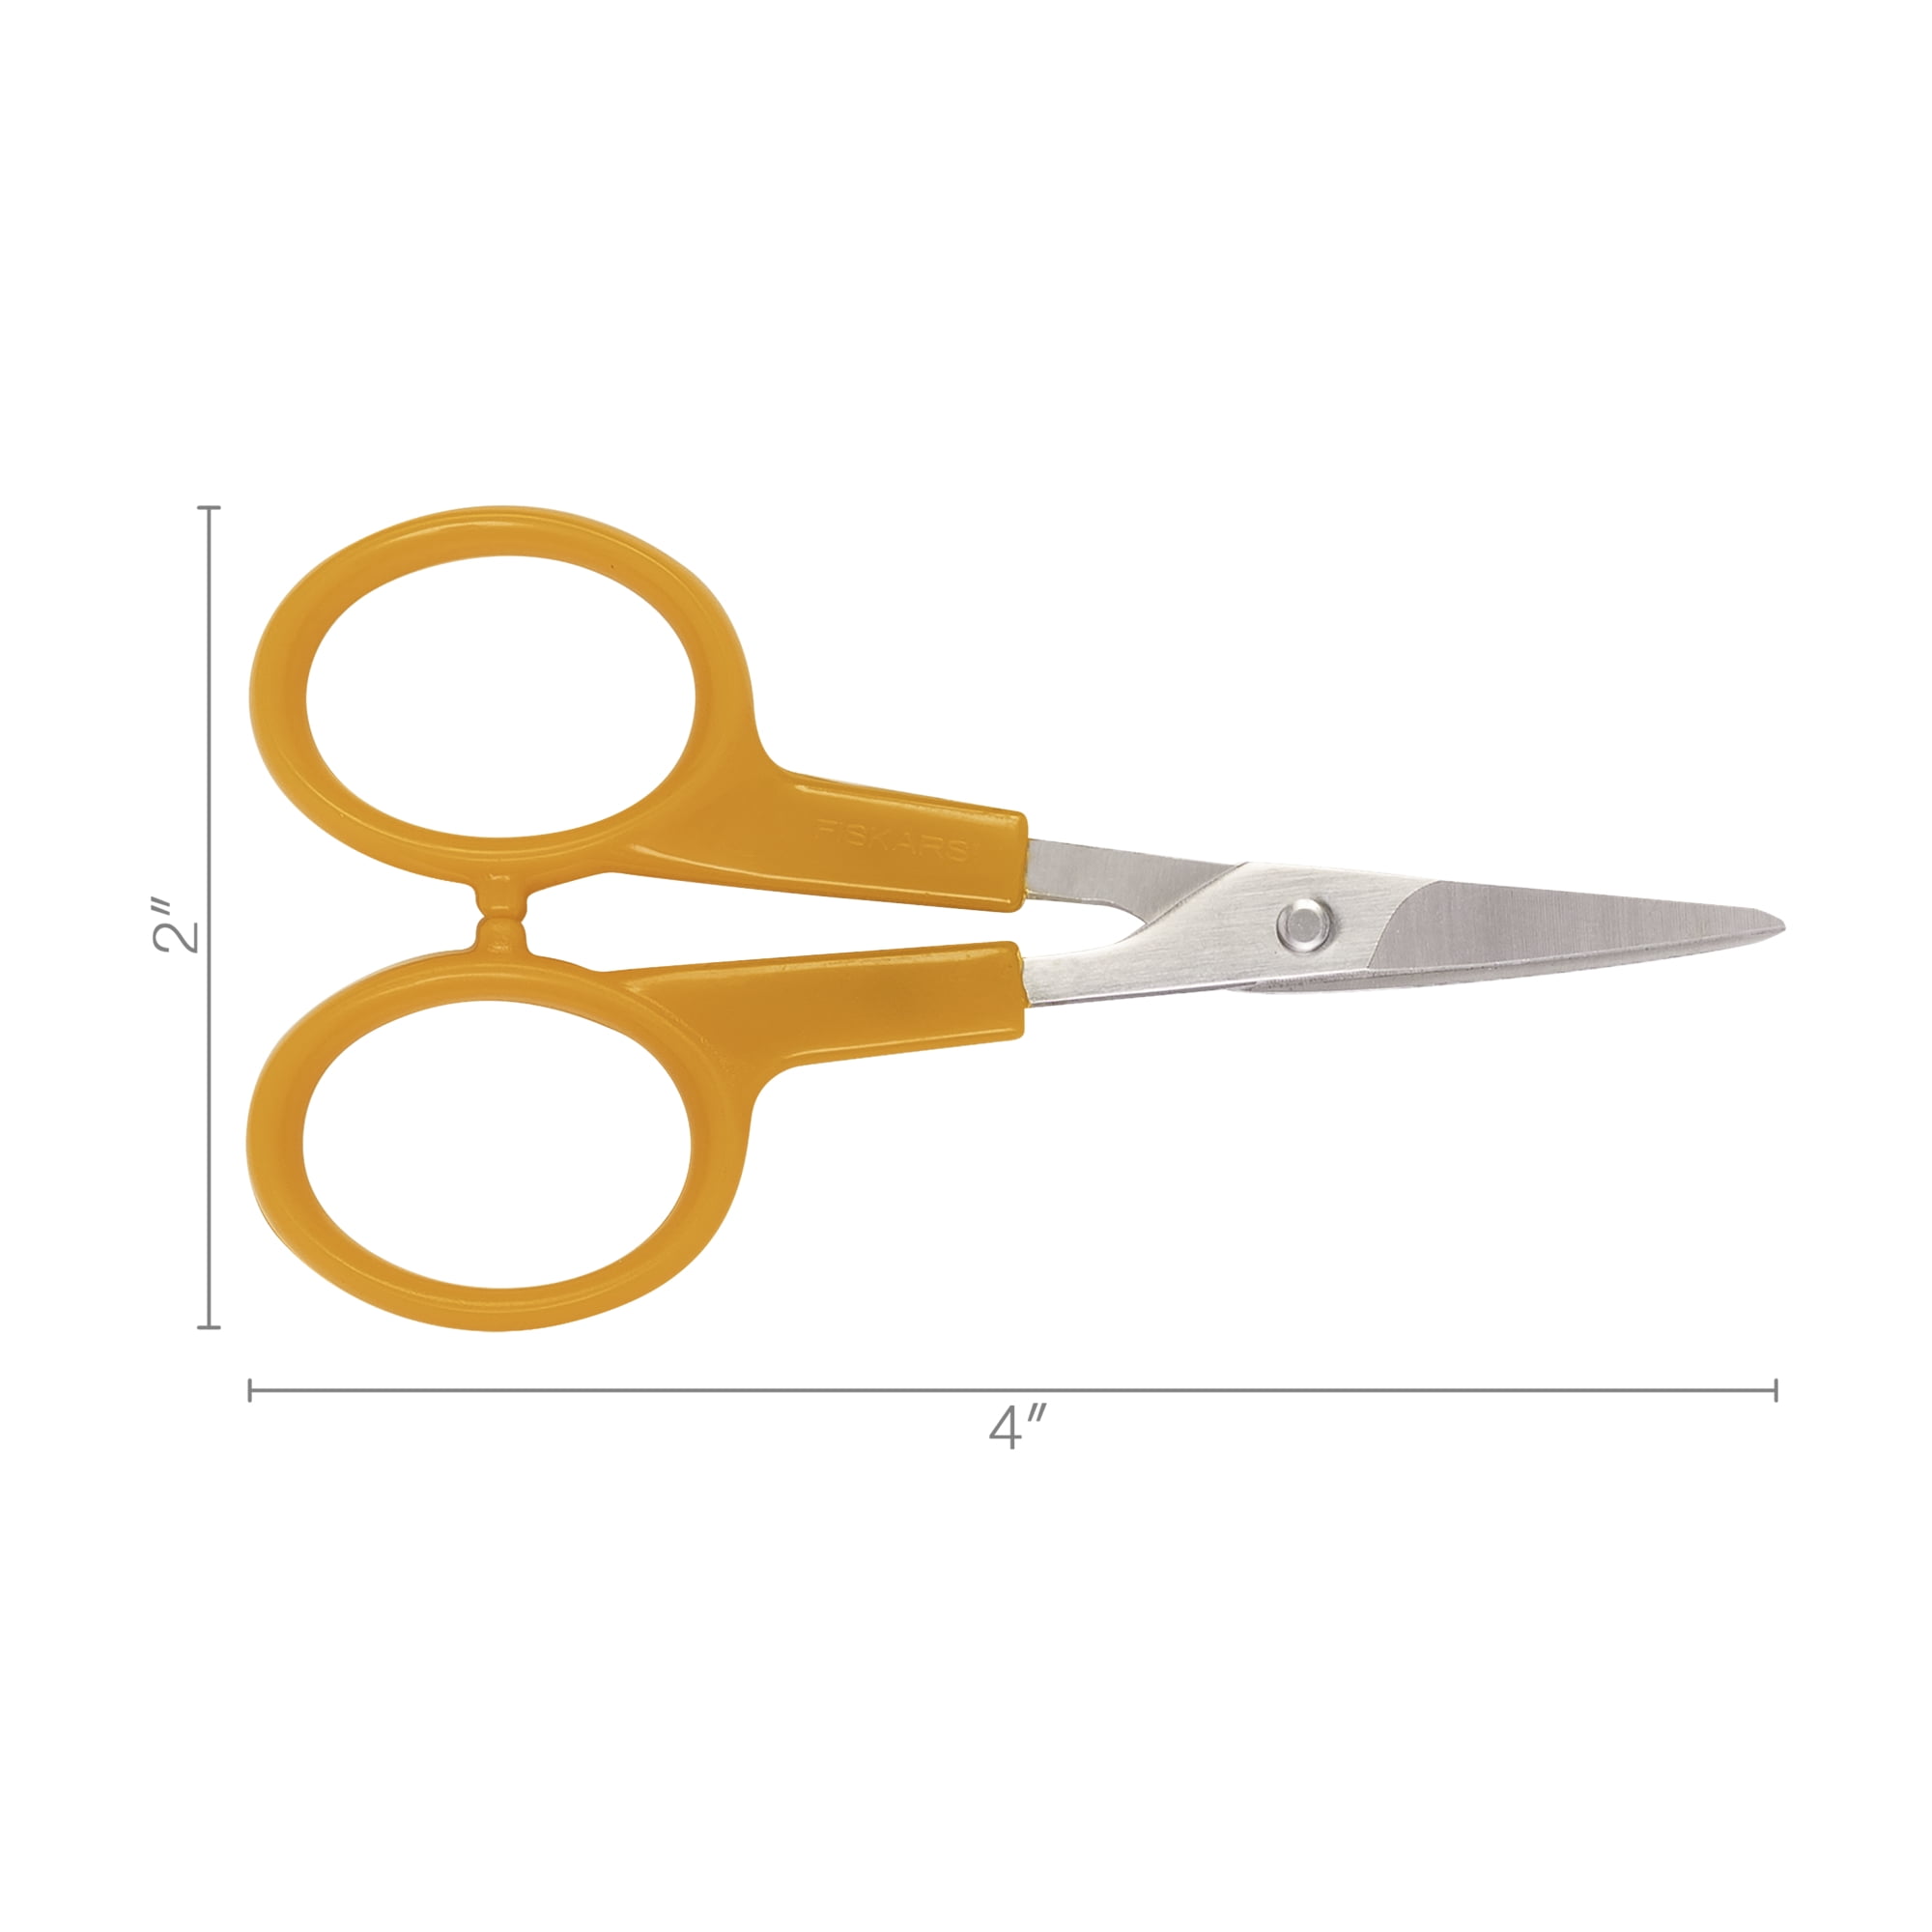 Curved Embroidery Scissors Large 4in - 644216519804